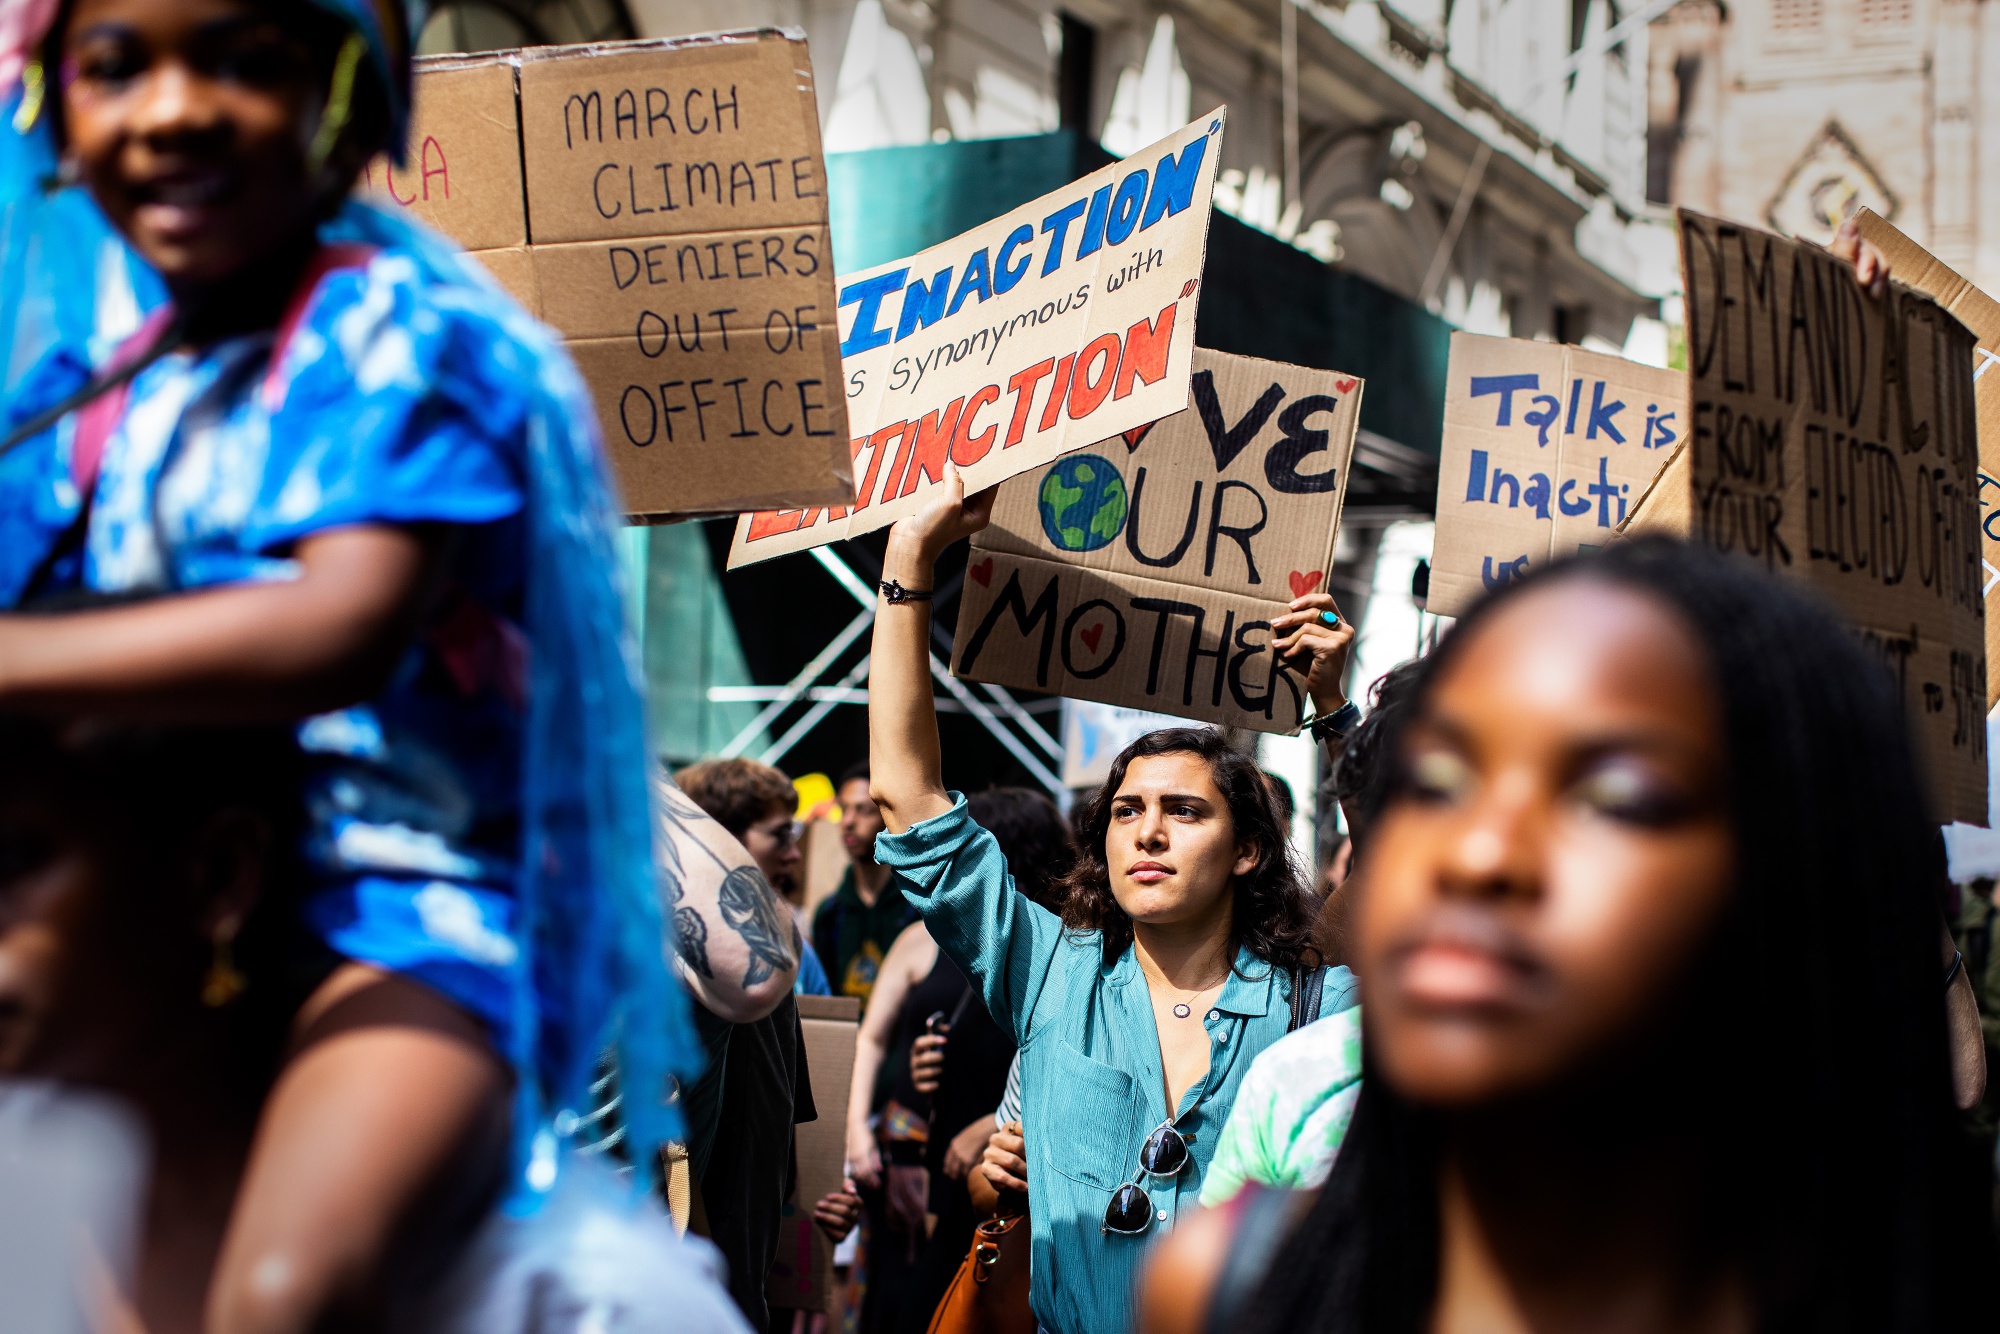 Protesters march during the Global Climate Strike in New York on&nbsp;Sept. 20.&nbsp;